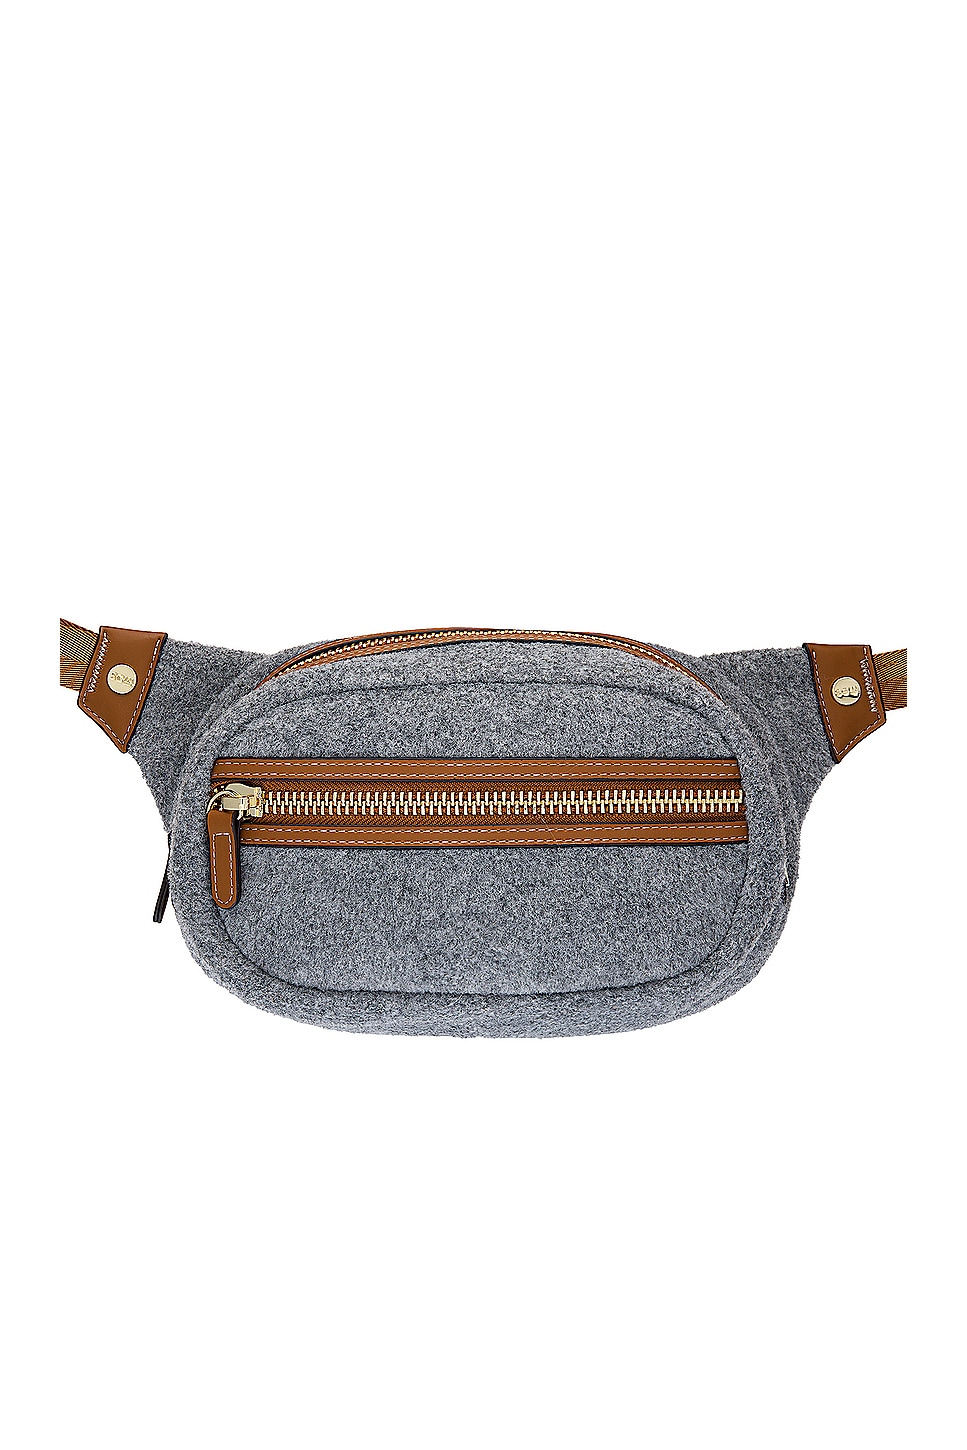 Stoney Clover Lane Sports Fanny Pack in Charcoal